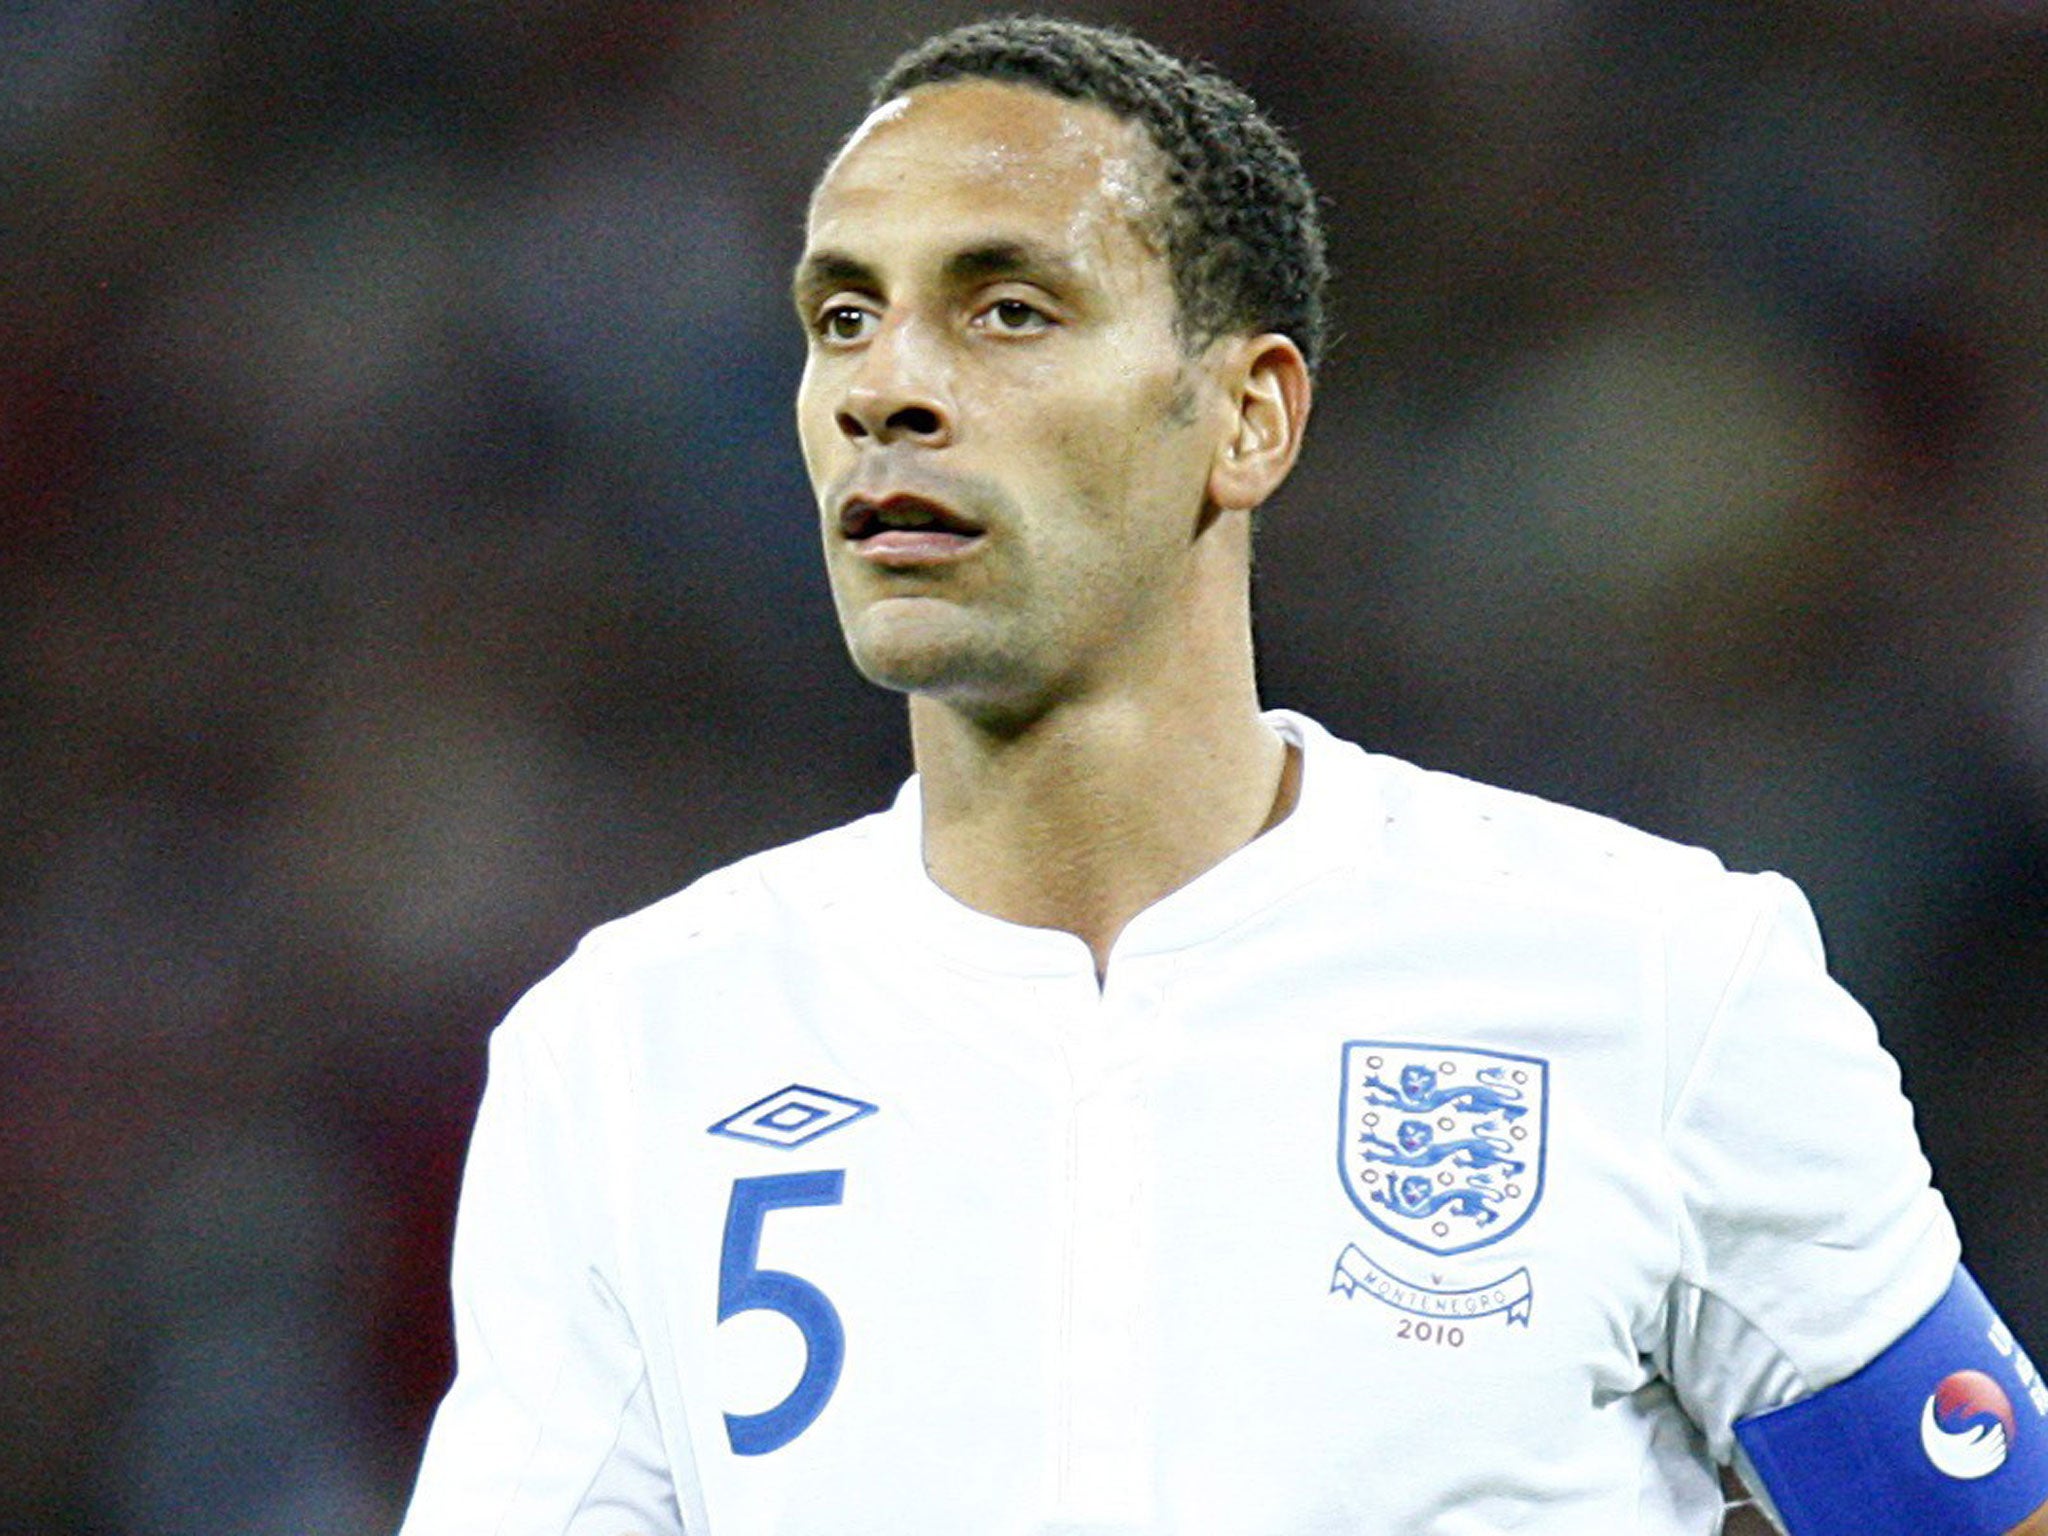 Ferdinand, who won the last of his 81 caps in June 2011, angered some England fans when he withdrew after being recalled to Roy Hodgson's squad for the match in San Marino and Tuesday's World Cup qualifier against Montenegro that ended in a 1-1 draw.